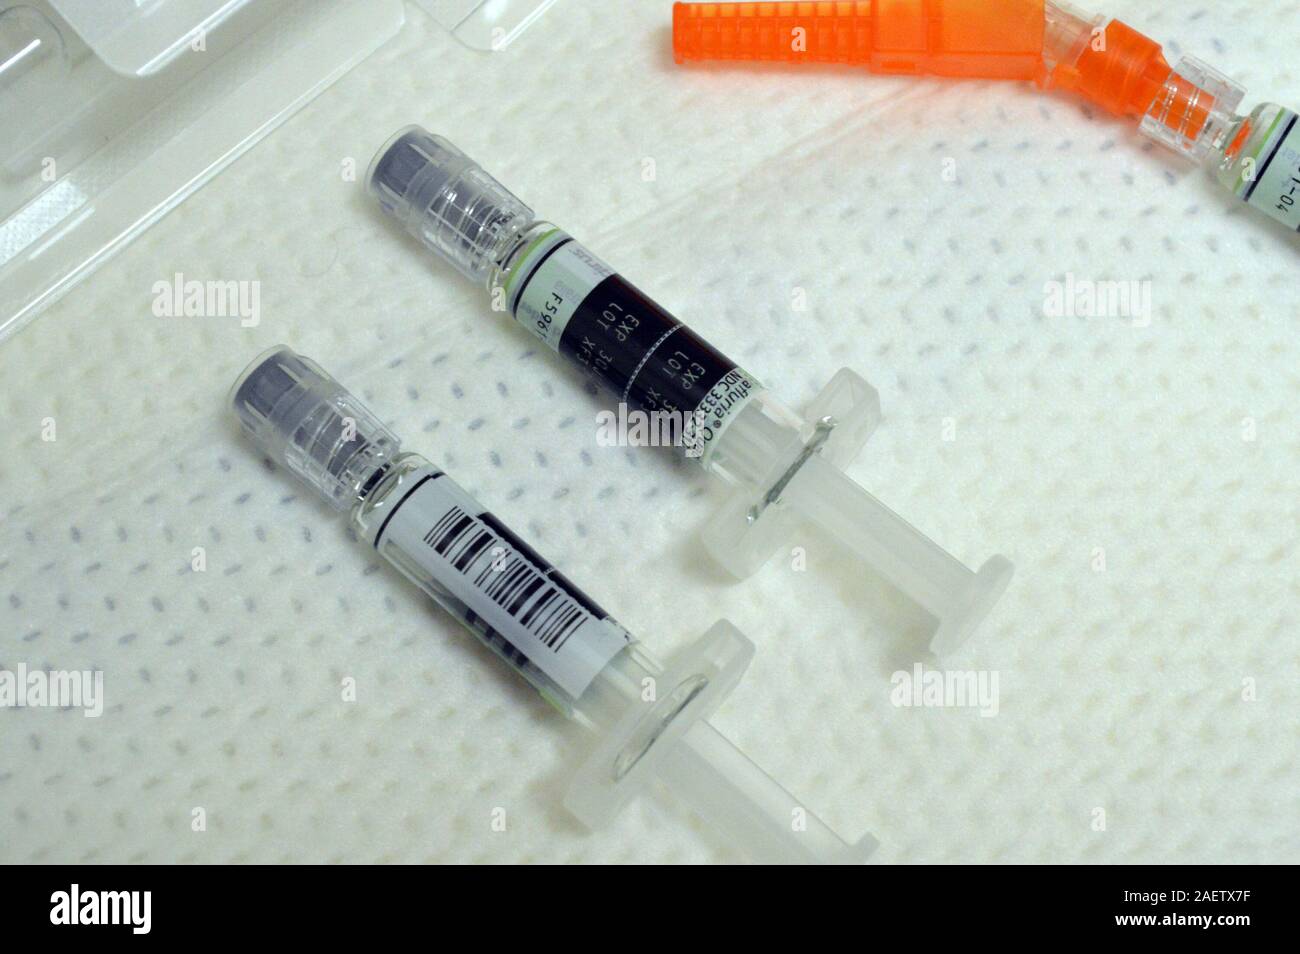 Flu vaccine dosages are seen at St. Mary Medical Center Thursday, November 9, 2017 in Langhorne, Pennsylvania. (Photo by William Thomas Cain) Stock Photo